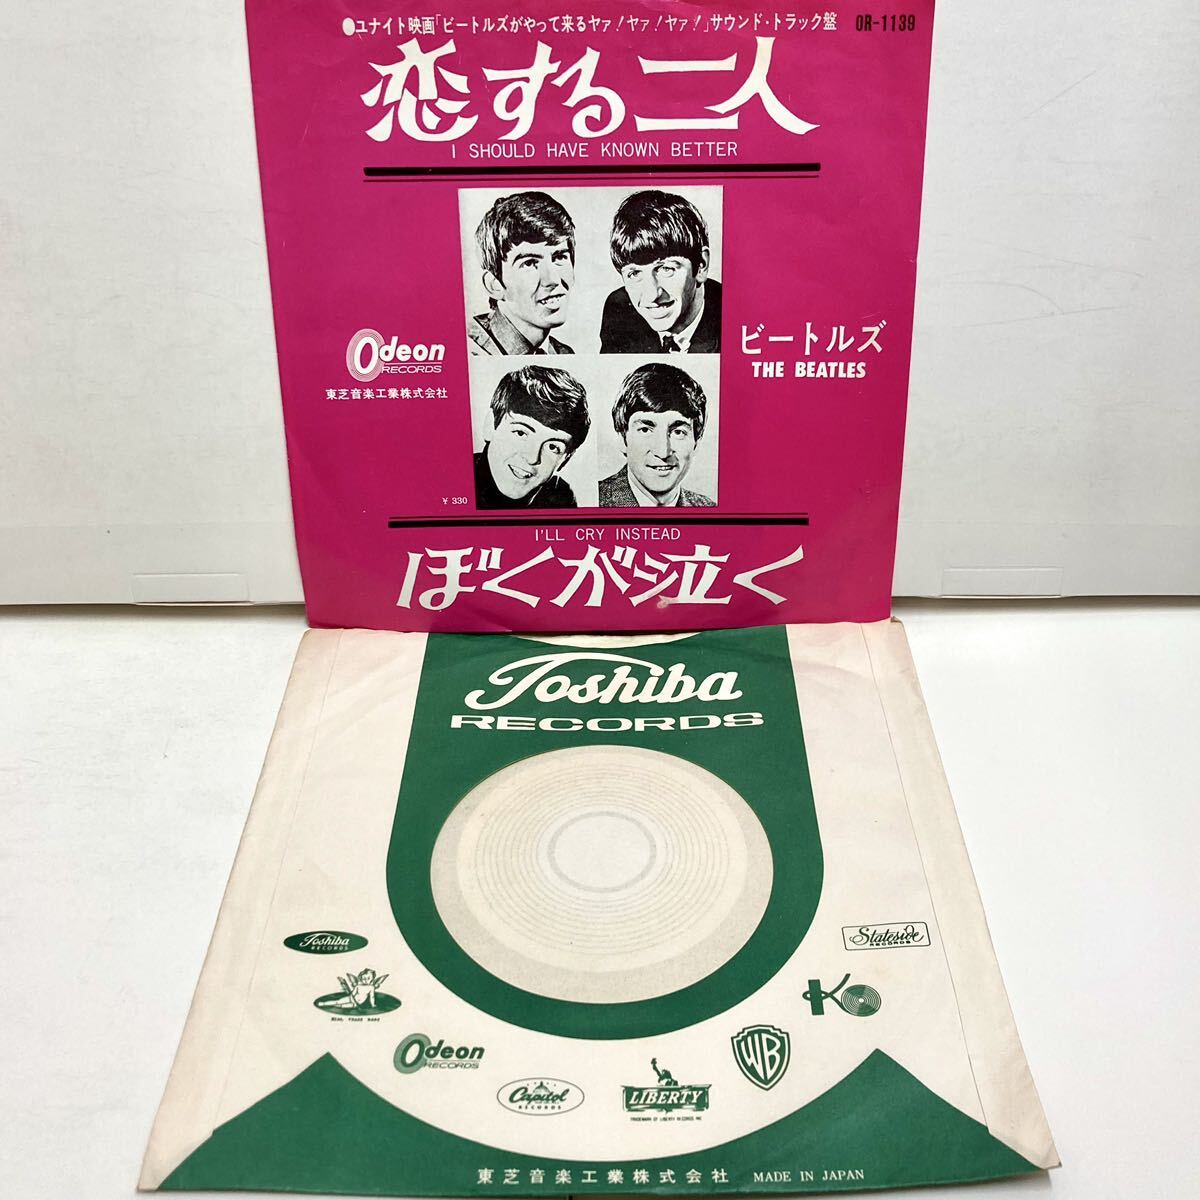 I Should Have Known Better 恋する二人 , I'll Cry Instead / The Beatles ビートルズ【EP アナログ レコード 】サウンドトラック盤 _画像6